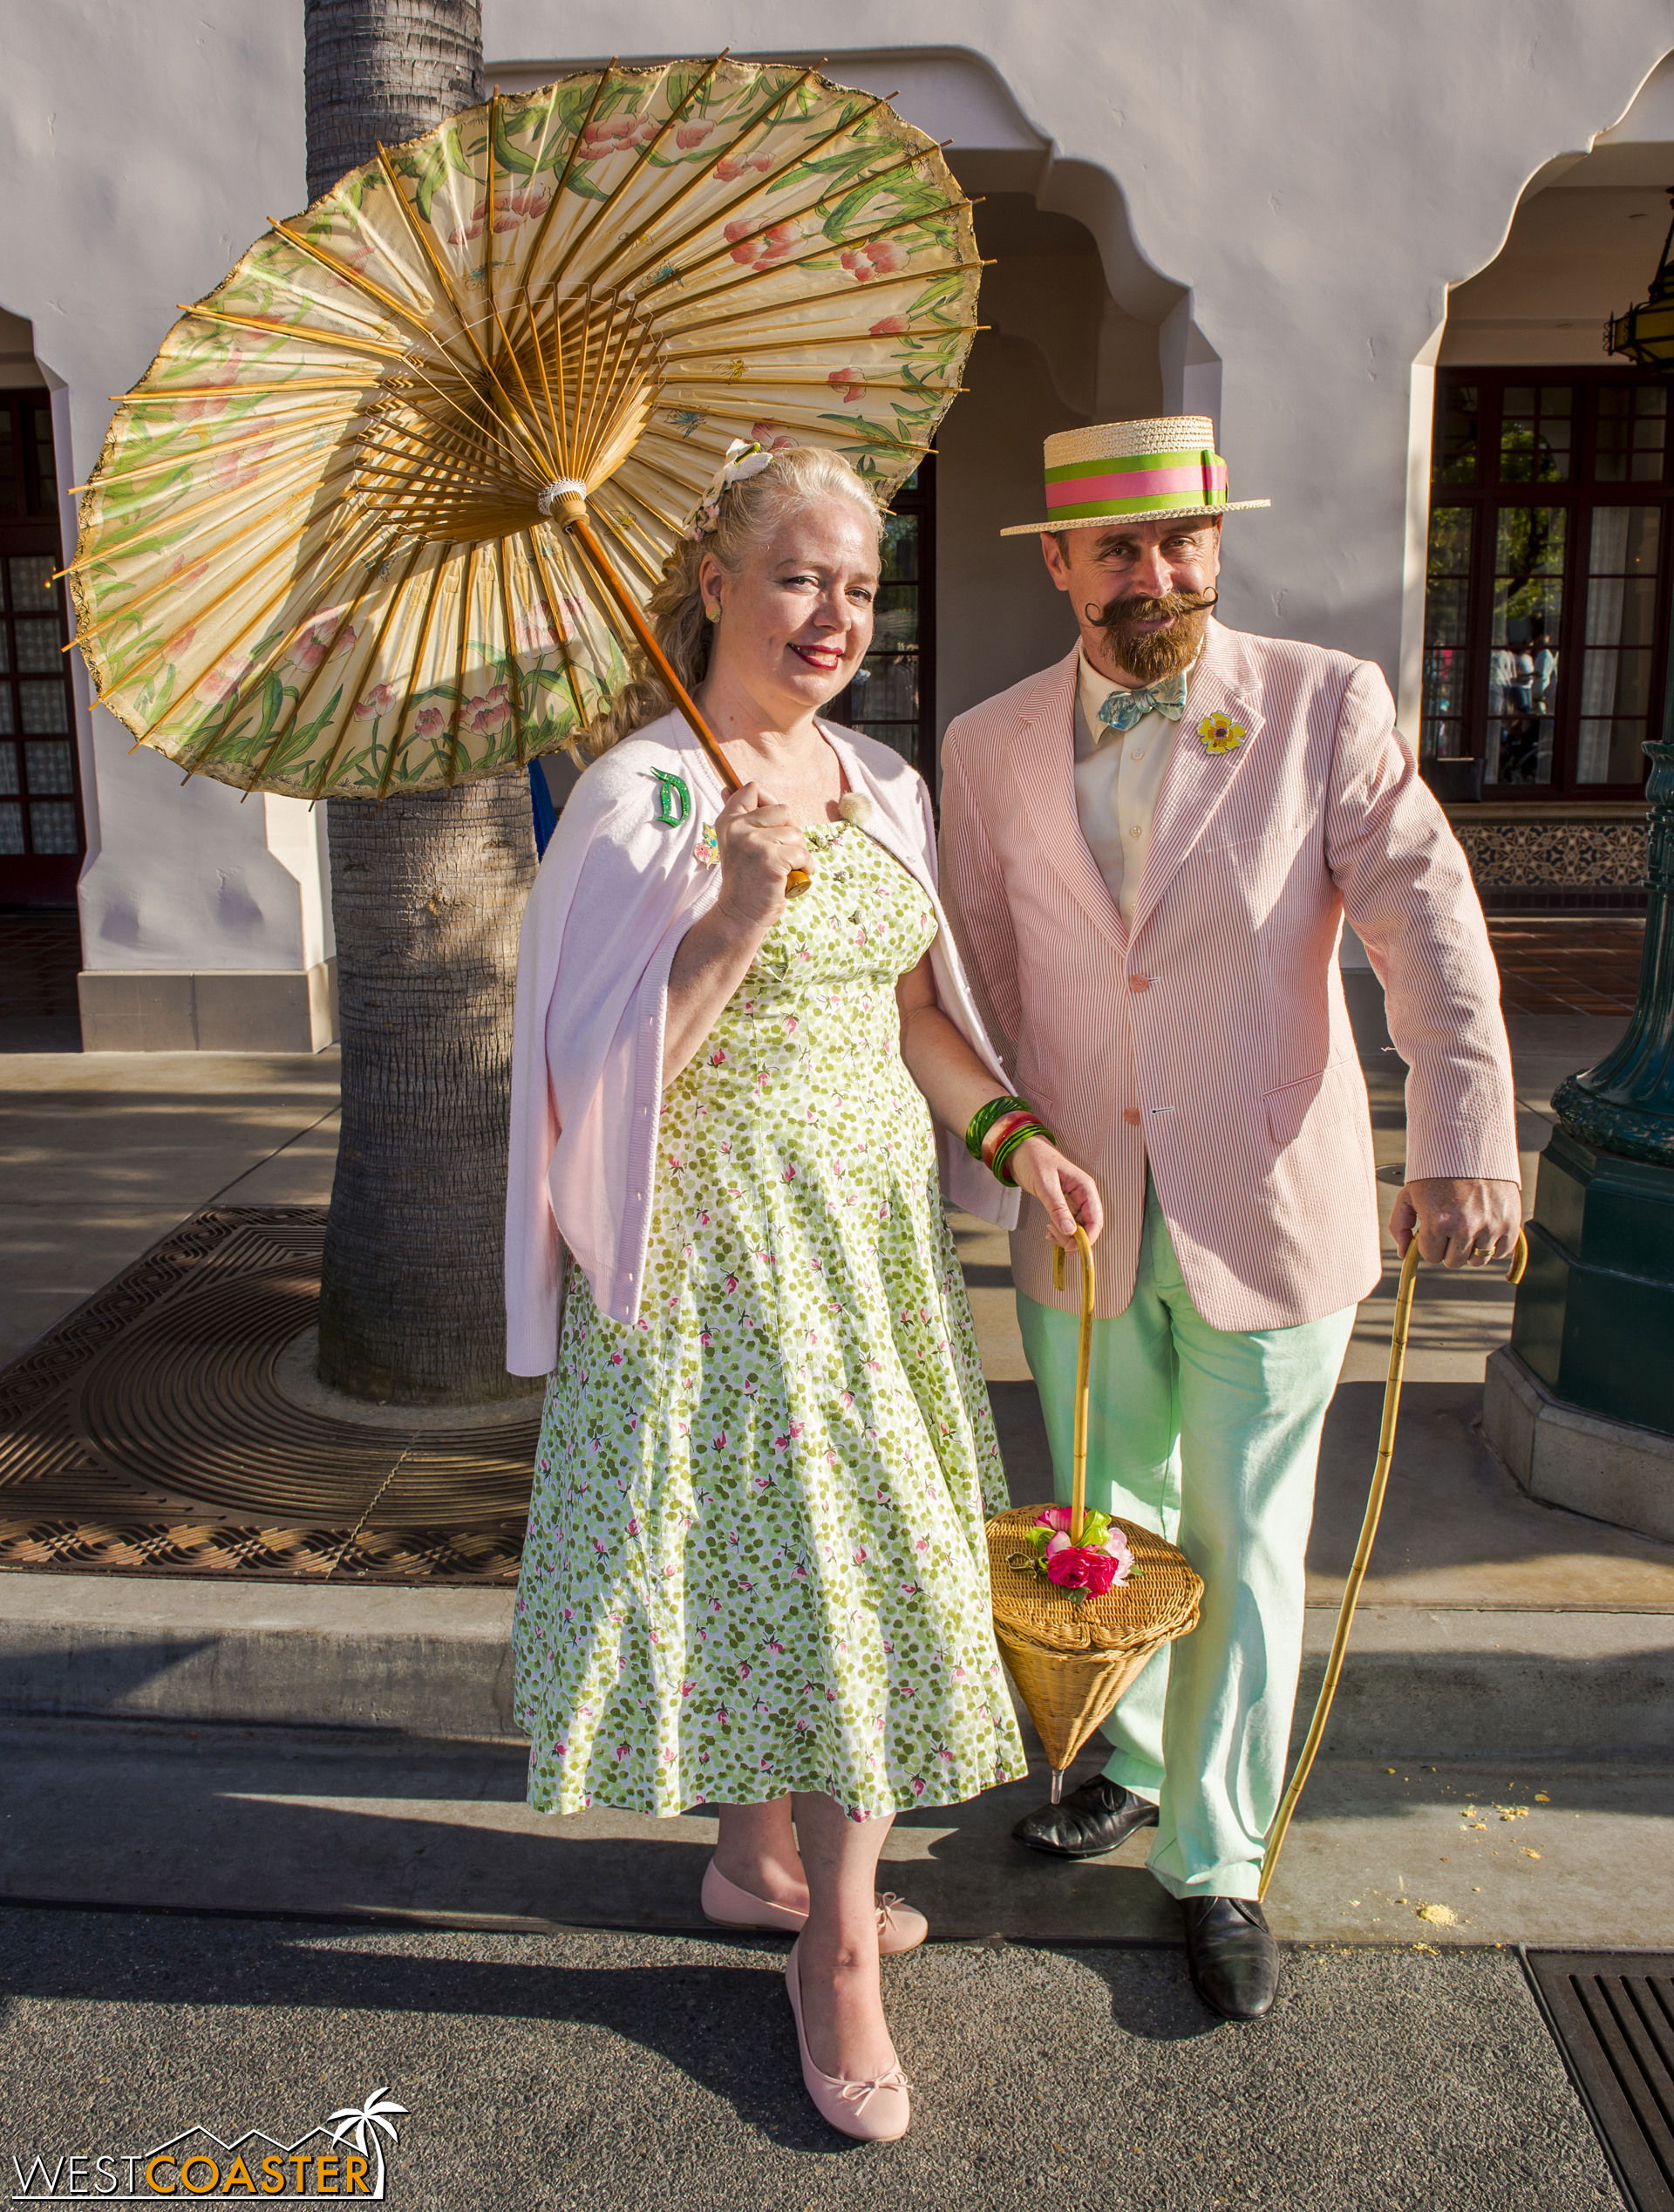  This couple imbibes full springtime and Easter vibrance. 